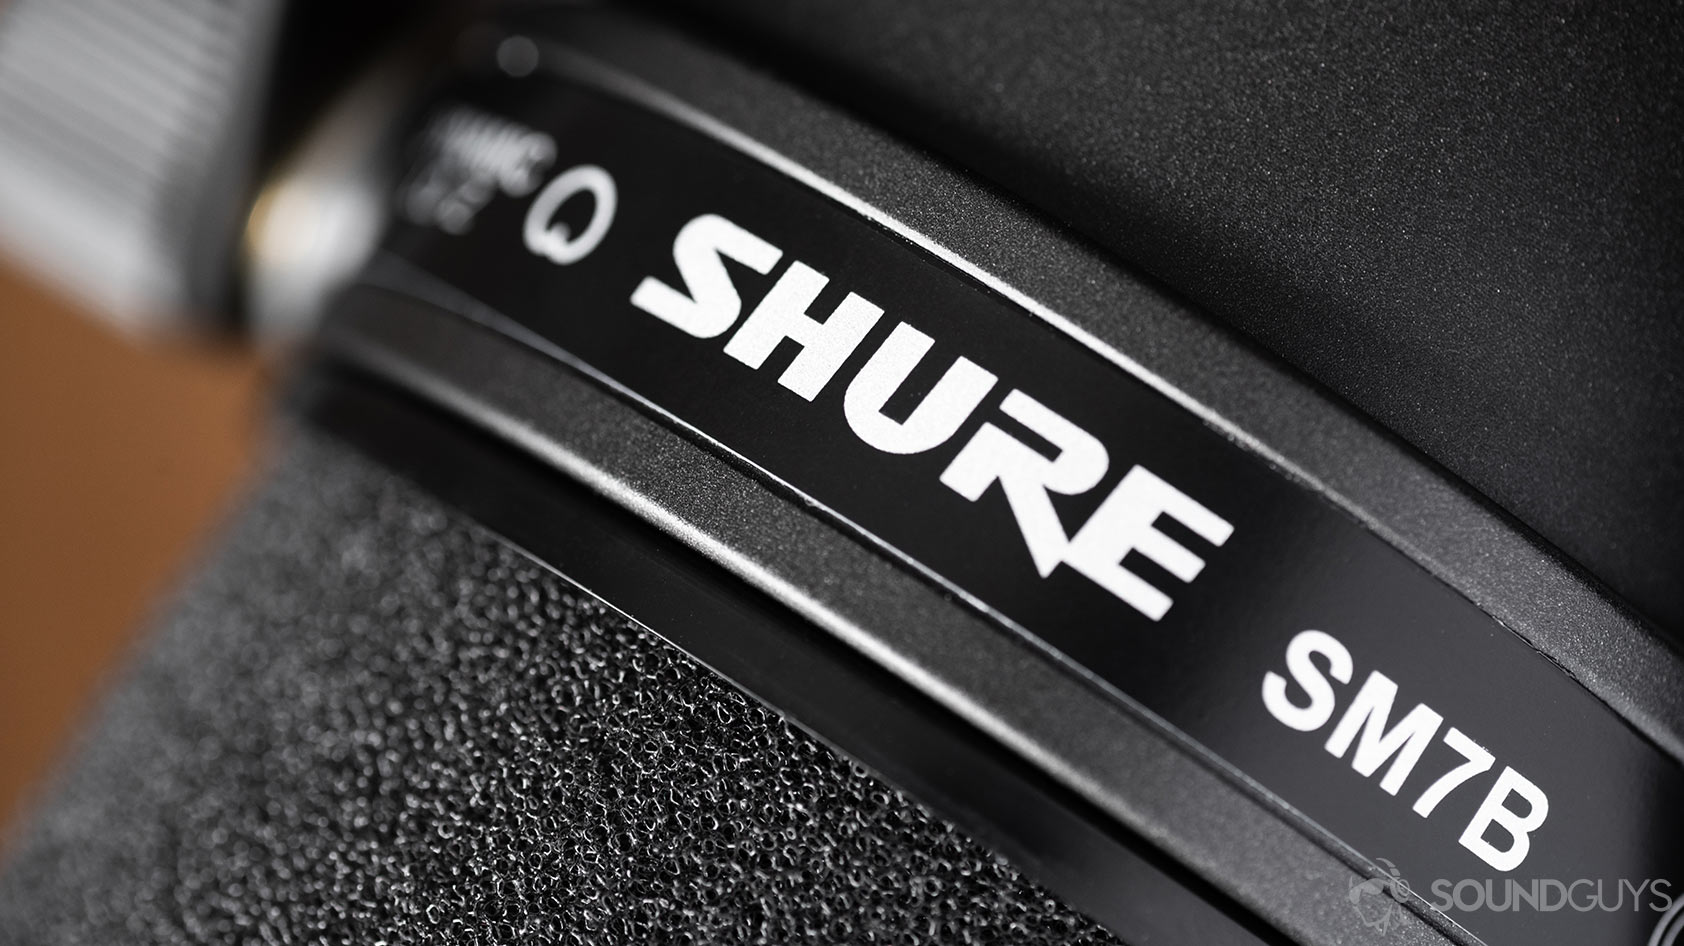 A macro photo of the Shure SM7B dynamic microphone Shure logo and cardioid icon.